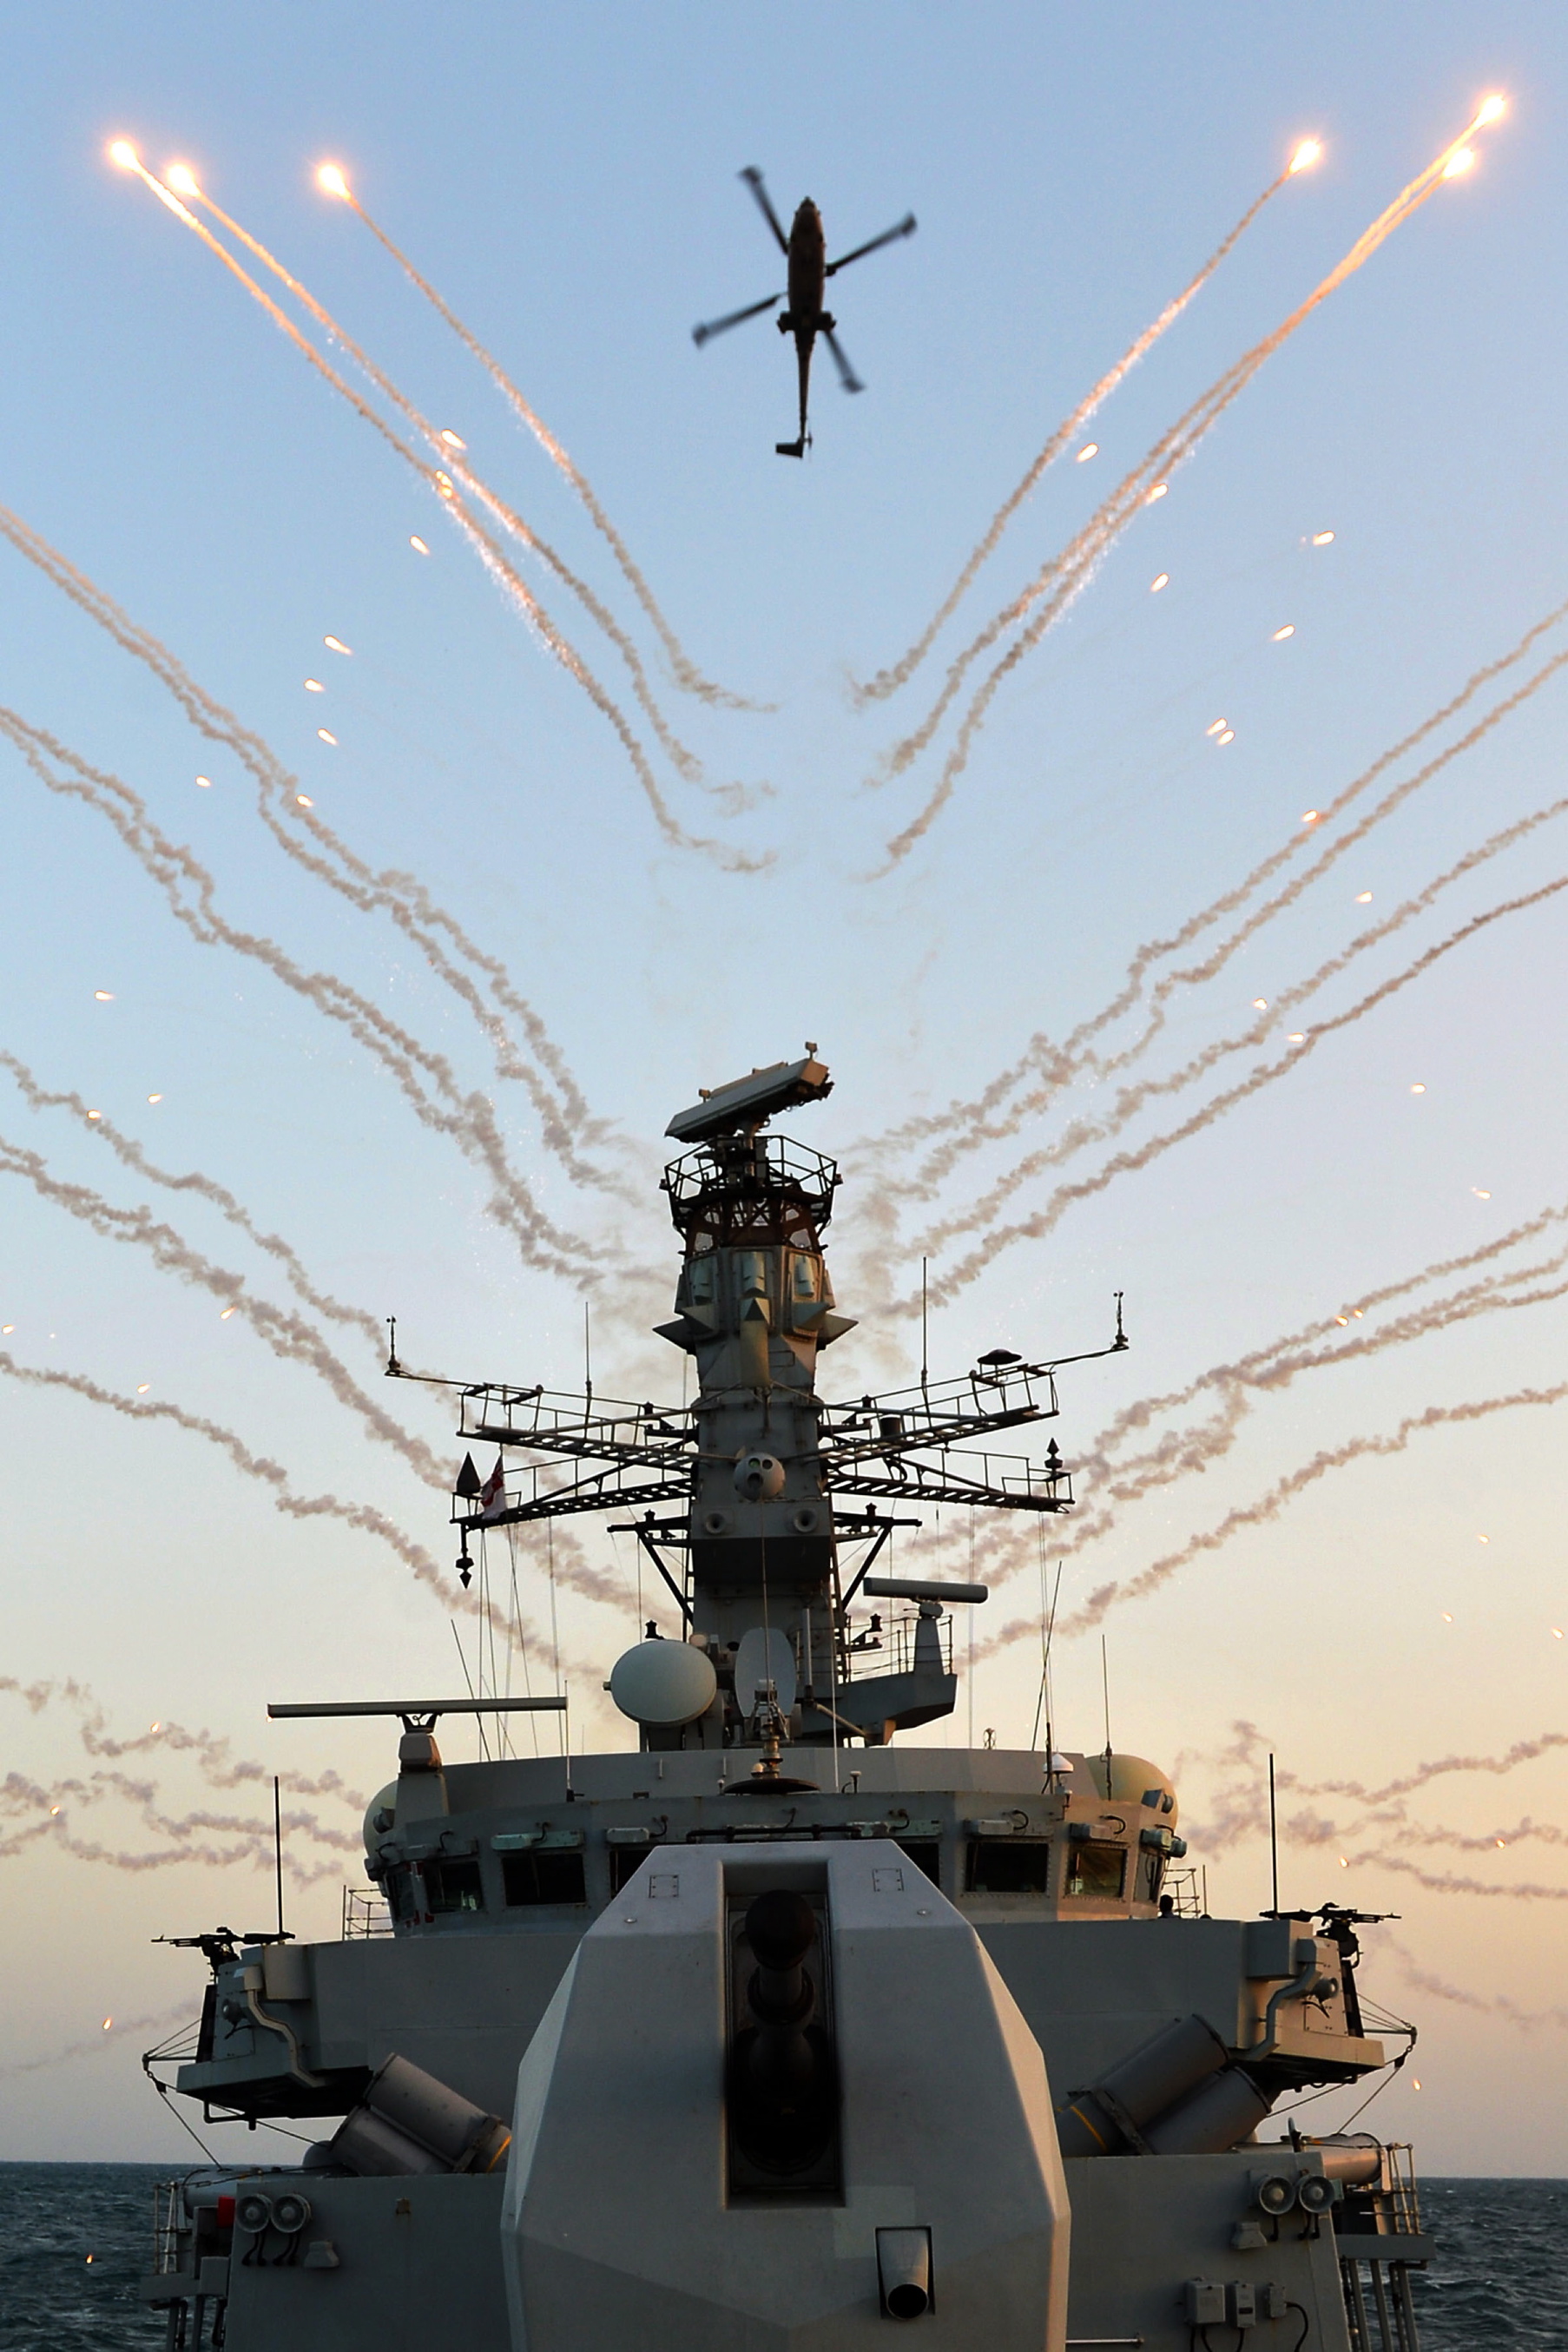 Lynx_Helicopter_Firing_Flares_Over_HMS_Monmouth_MOD_45154841.jpg